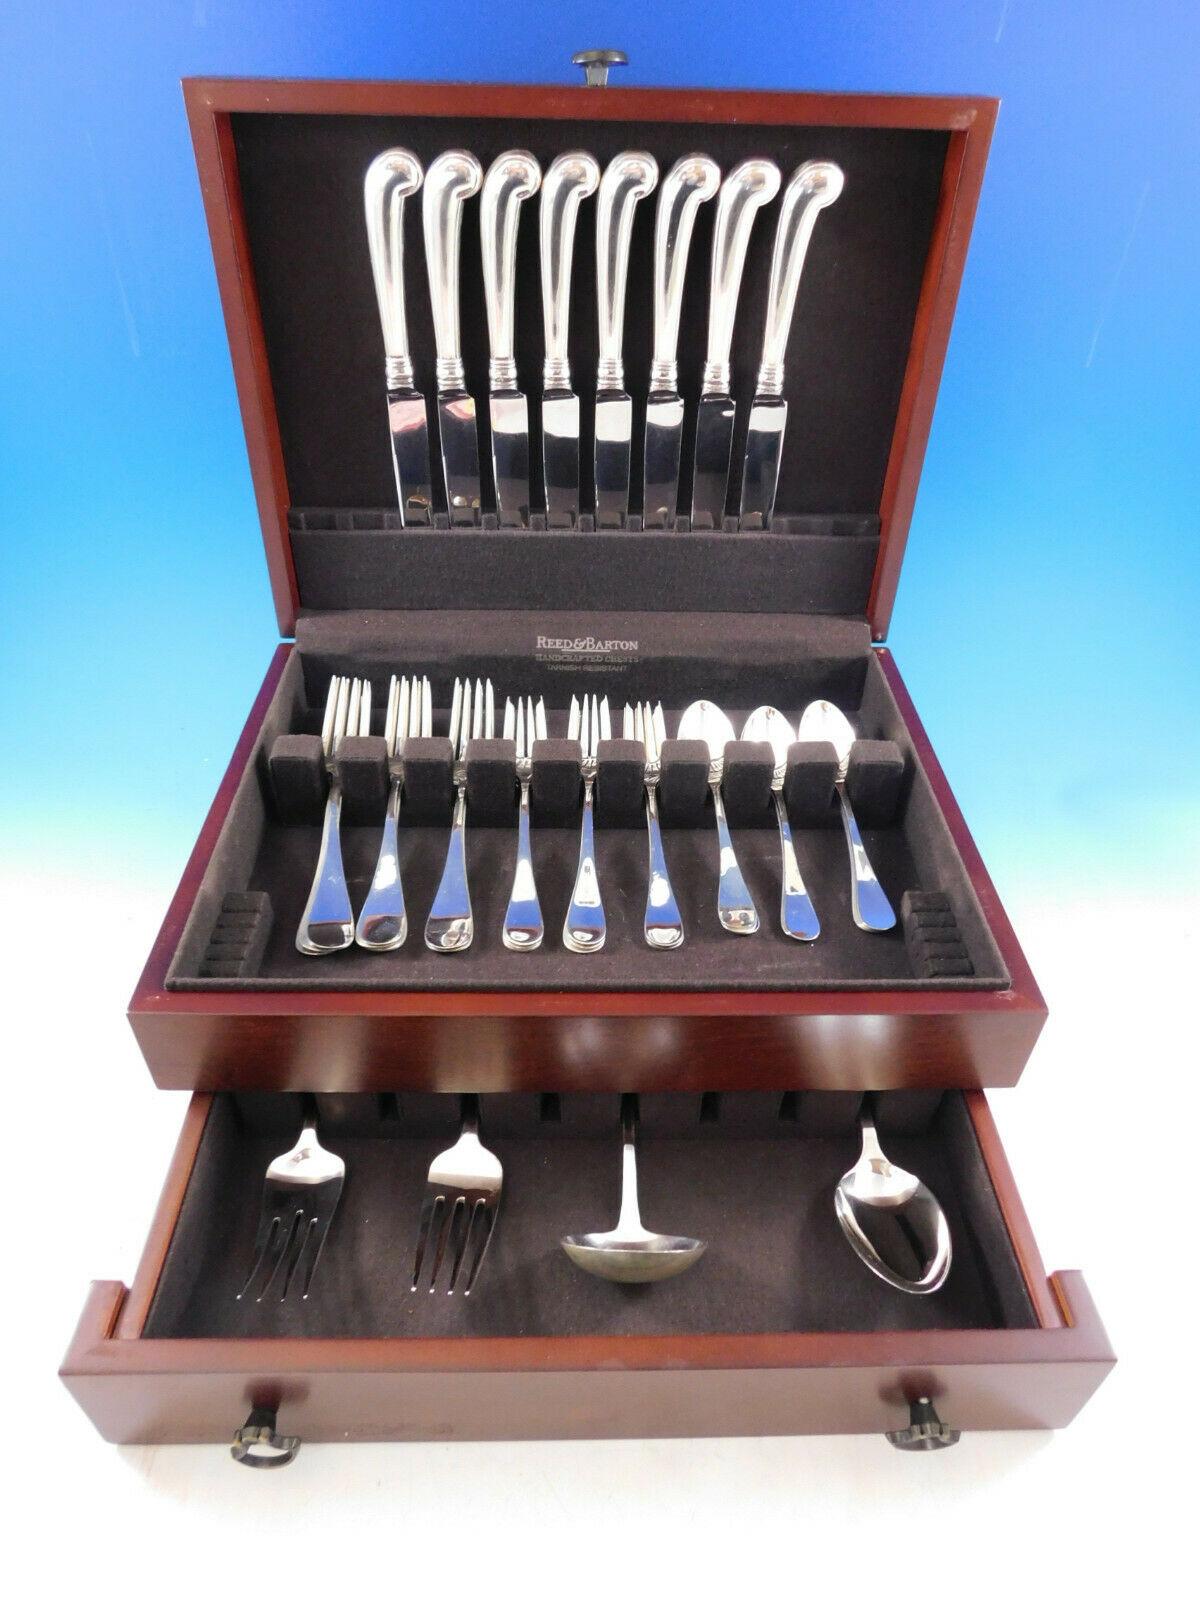 Dinner size King William by Tiffany and Co. sterling silver Flatware set, 36 pieces. This Old English style pattern was introduced in the year 1870. The pieces are large and heavy, with wonderful pistol grip handle knives. This set includes:

8